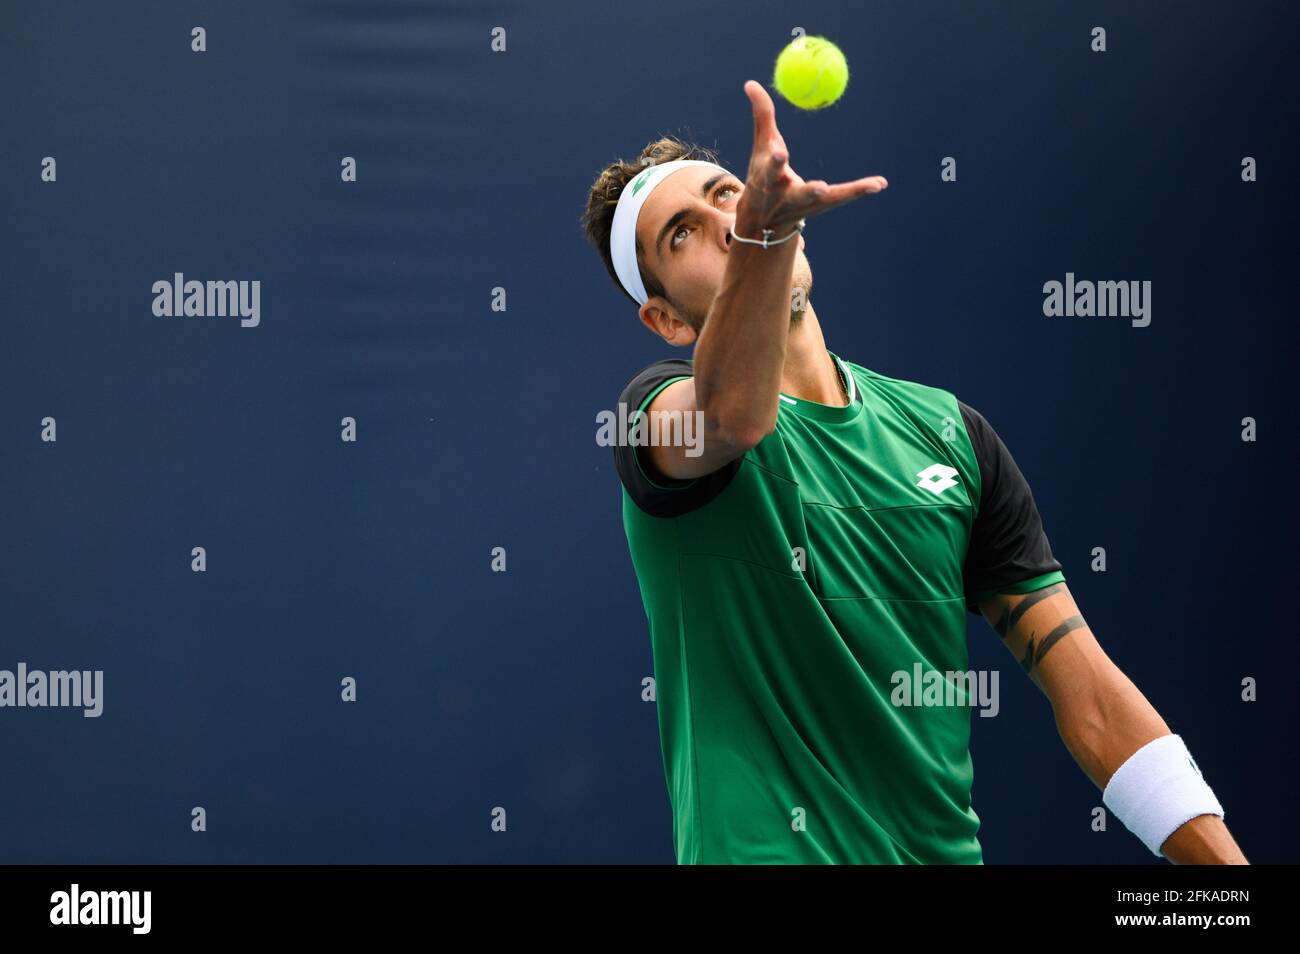 March 24, 2021 Alejandro Tabilo of Chile serves the ball during his loss to Mikael Ymer of Sweden in the first round of the Miami Open on March 24, 2021 on the